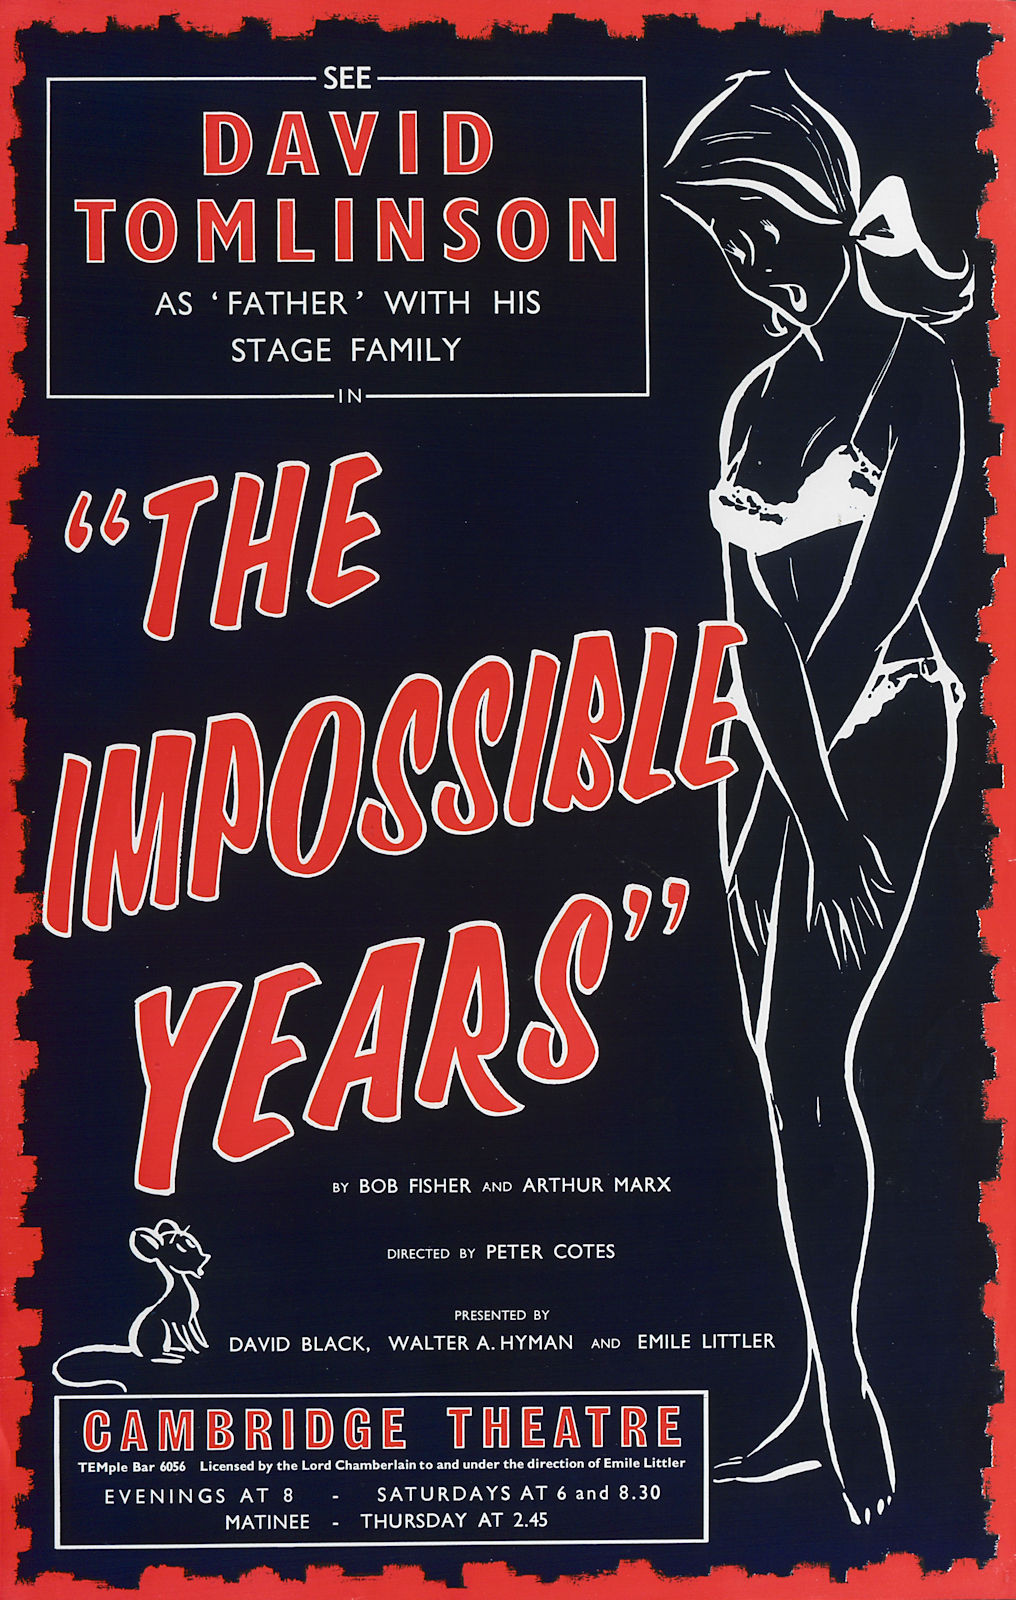 Associate Product Cambridge Theatre. The Impossible Years. Bob Fisher. Marx. David Tomlinson 1966